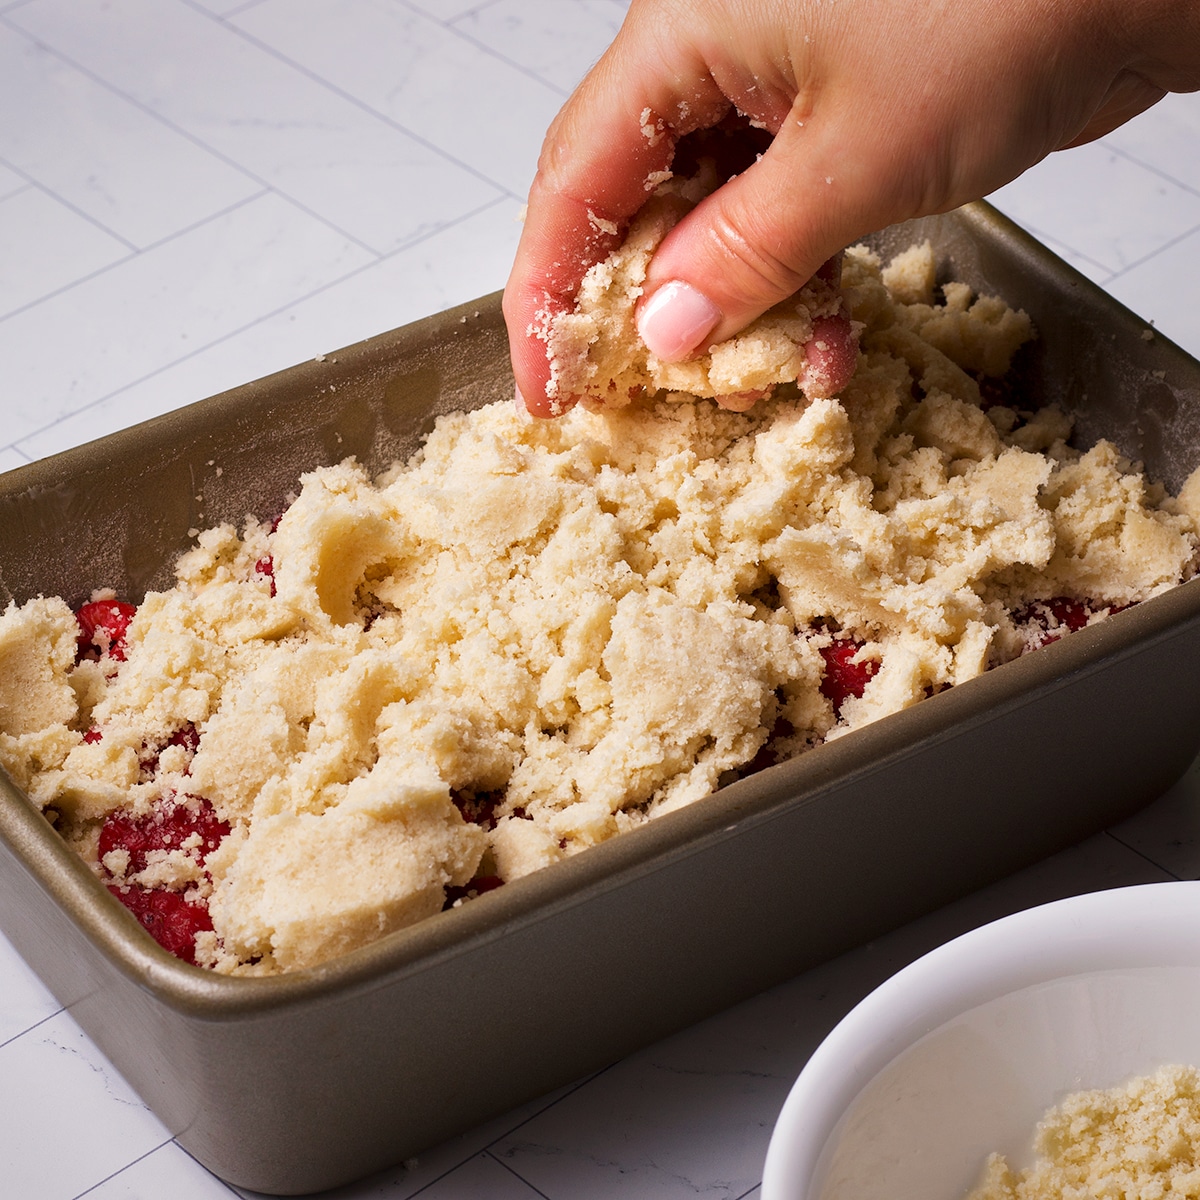 Someone using their fingers to squeeze the crumb topping together to create large crumbs as they top the raspberry bread batter with the topping.